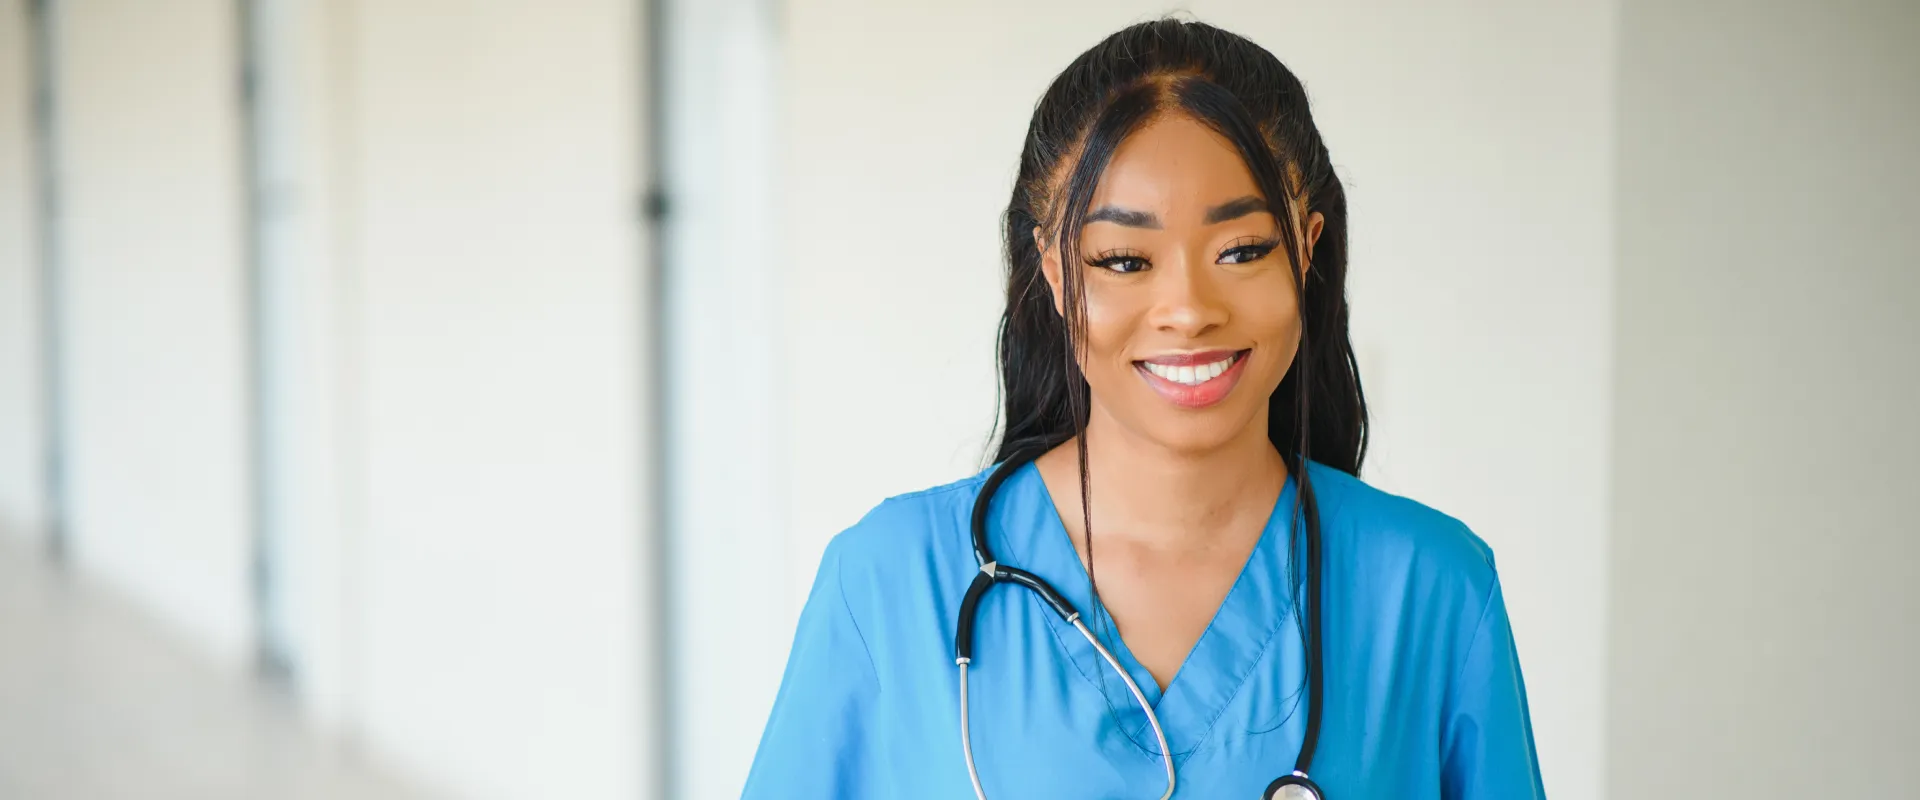 Why Become a Registered Nurse?